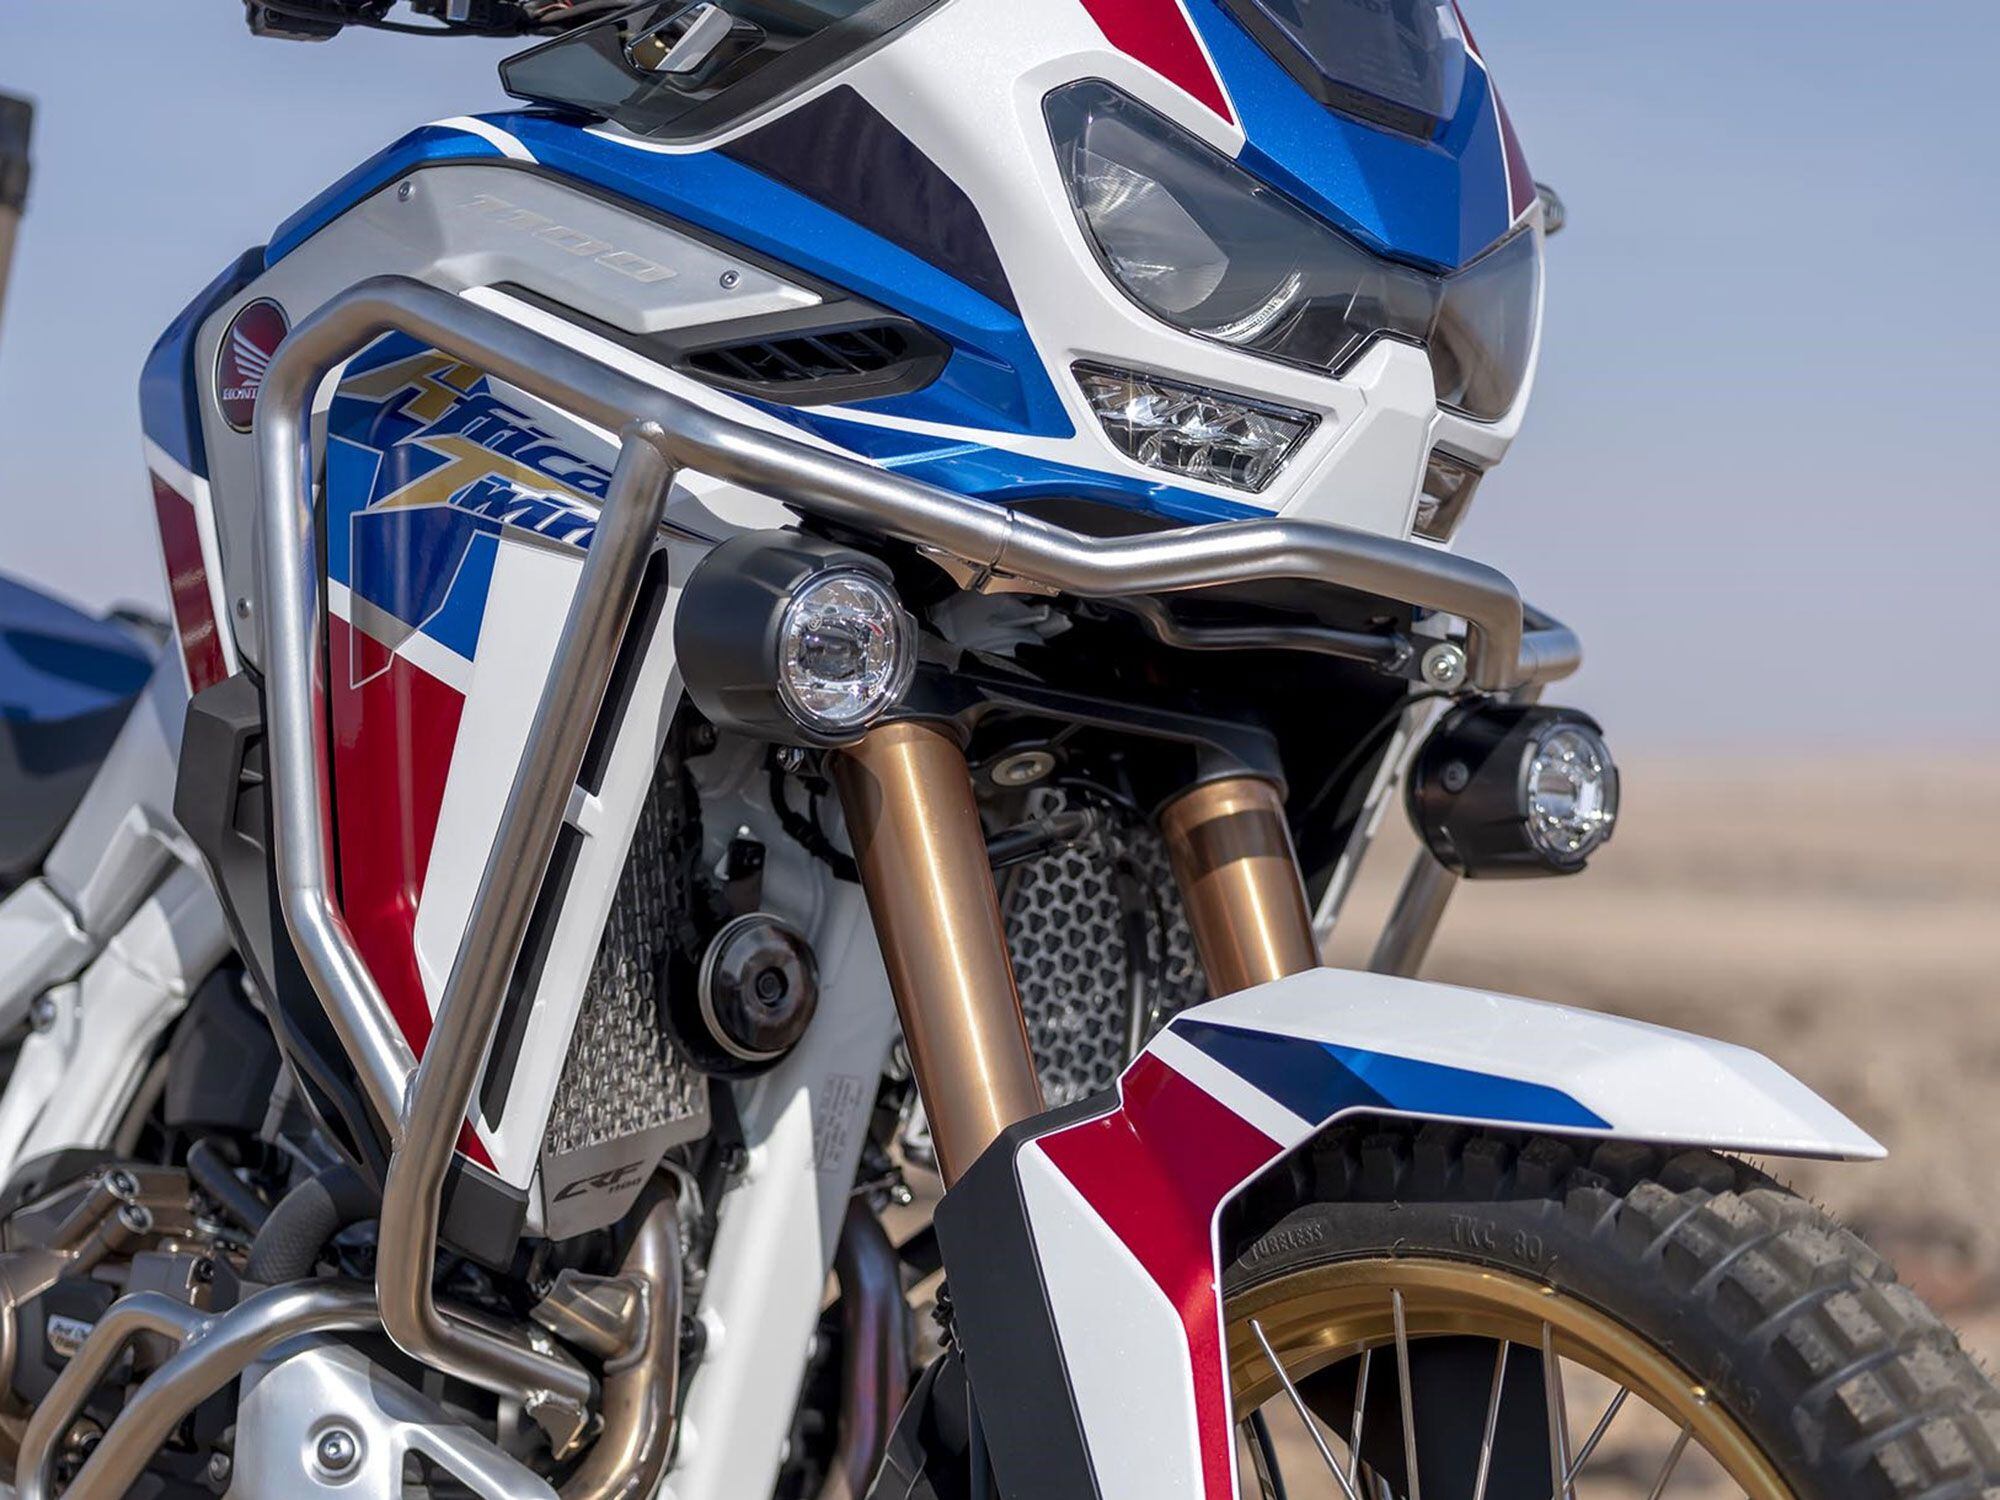 The Africa Twin already has the perfect spot for tucking in a sensor unobtrusively, just under the headlights.